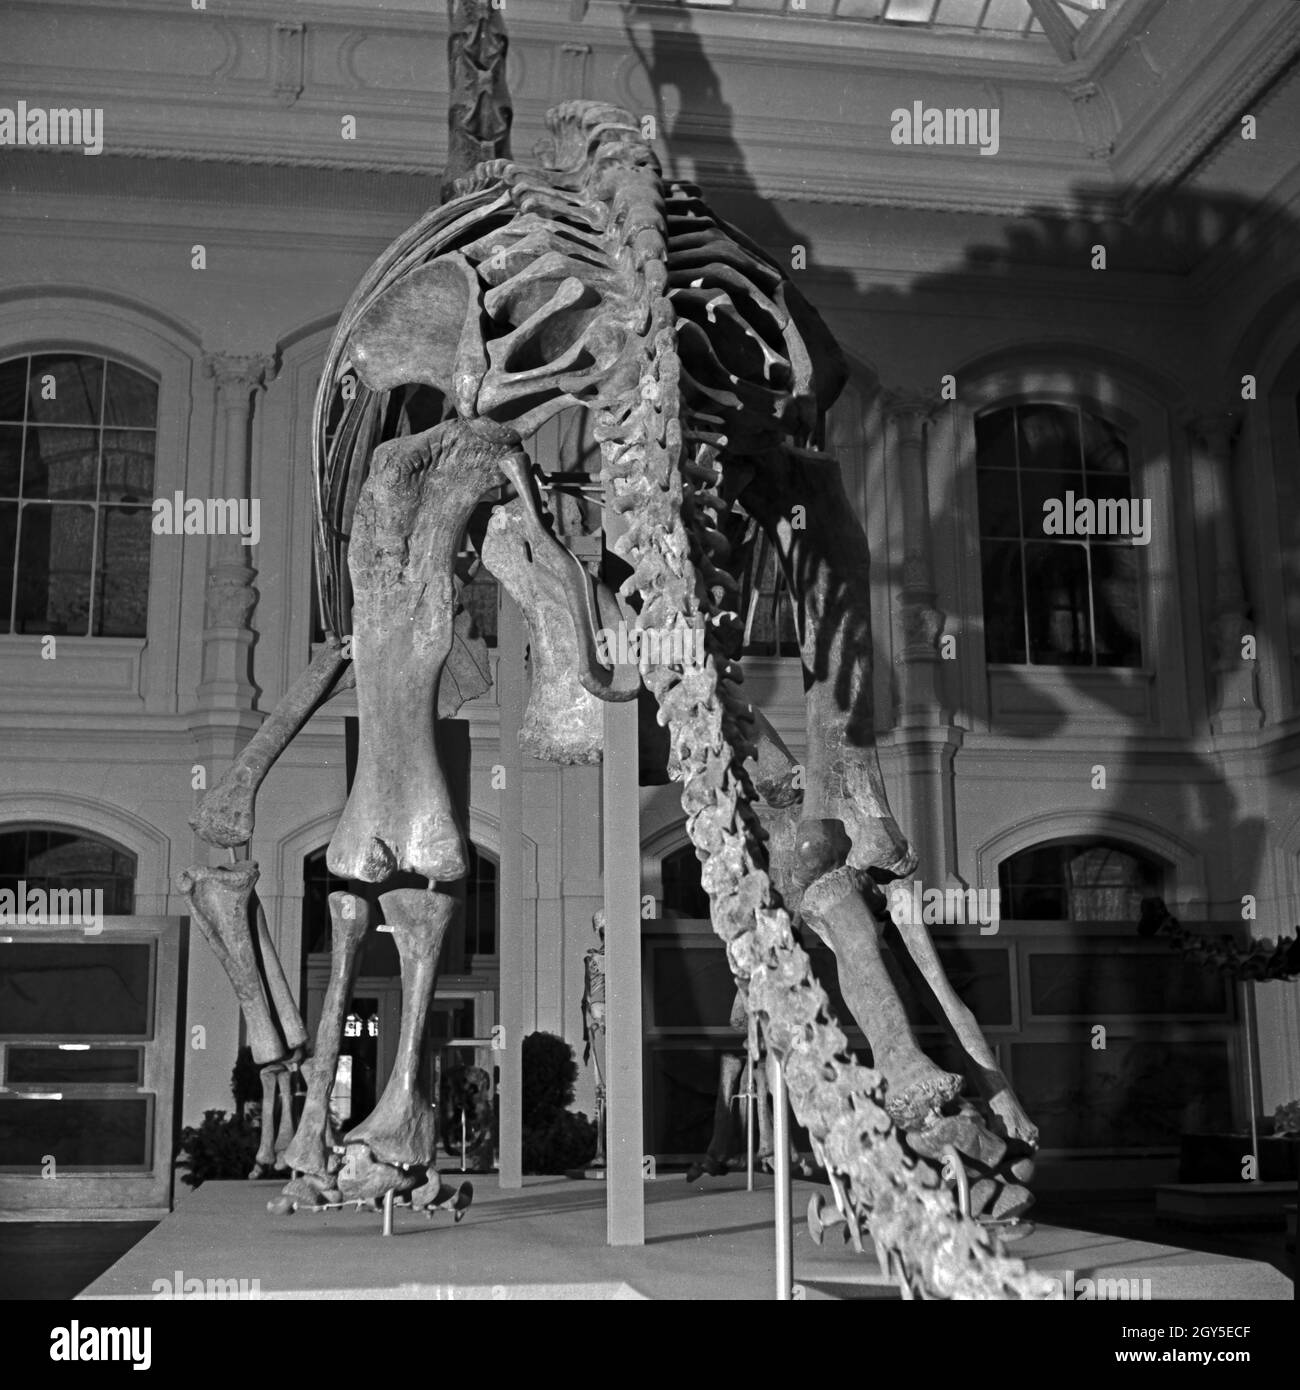 History museum and berlin Black and White Stock Photos & Images - Alamy